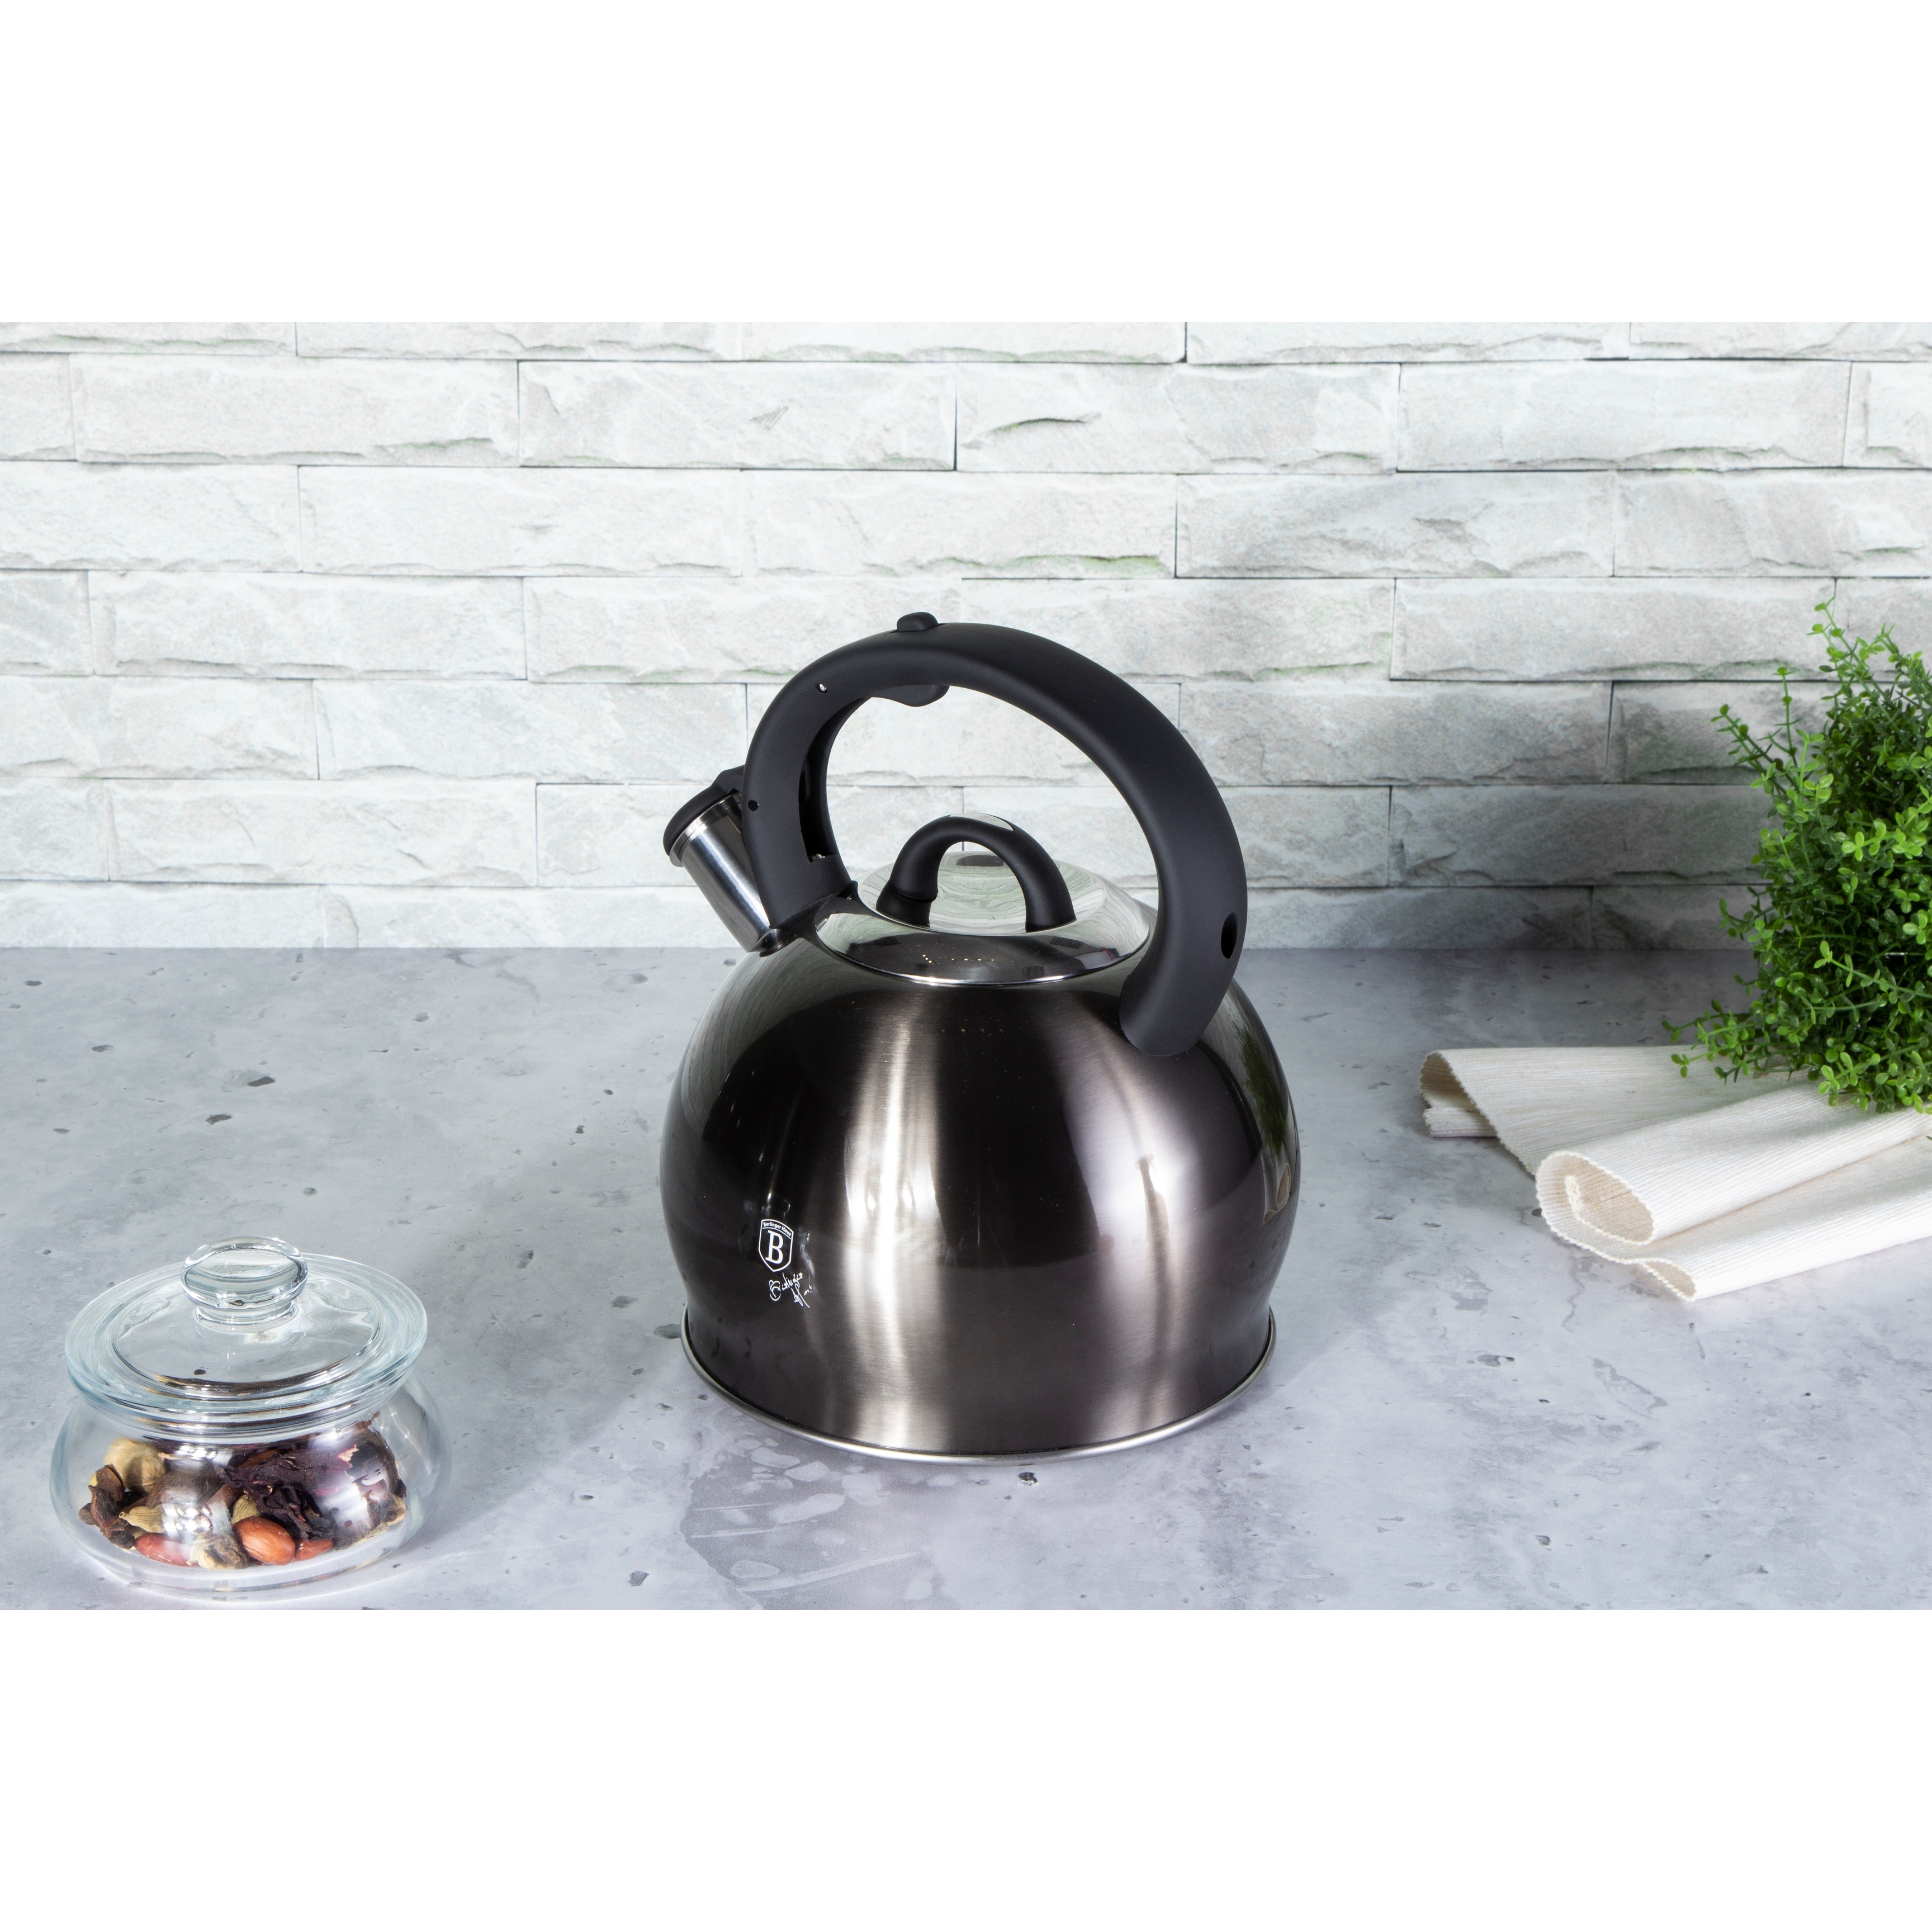 https://ak1.ostkcdn.com/images/products/is/images/direct/edcb9eec6b620adbe3c9fa9a82dc90fbb8d9f047/Berlinger-Haus-Stainless-Steel-Kettle-3.2-qt%2C-Carbon-Collection.jpg